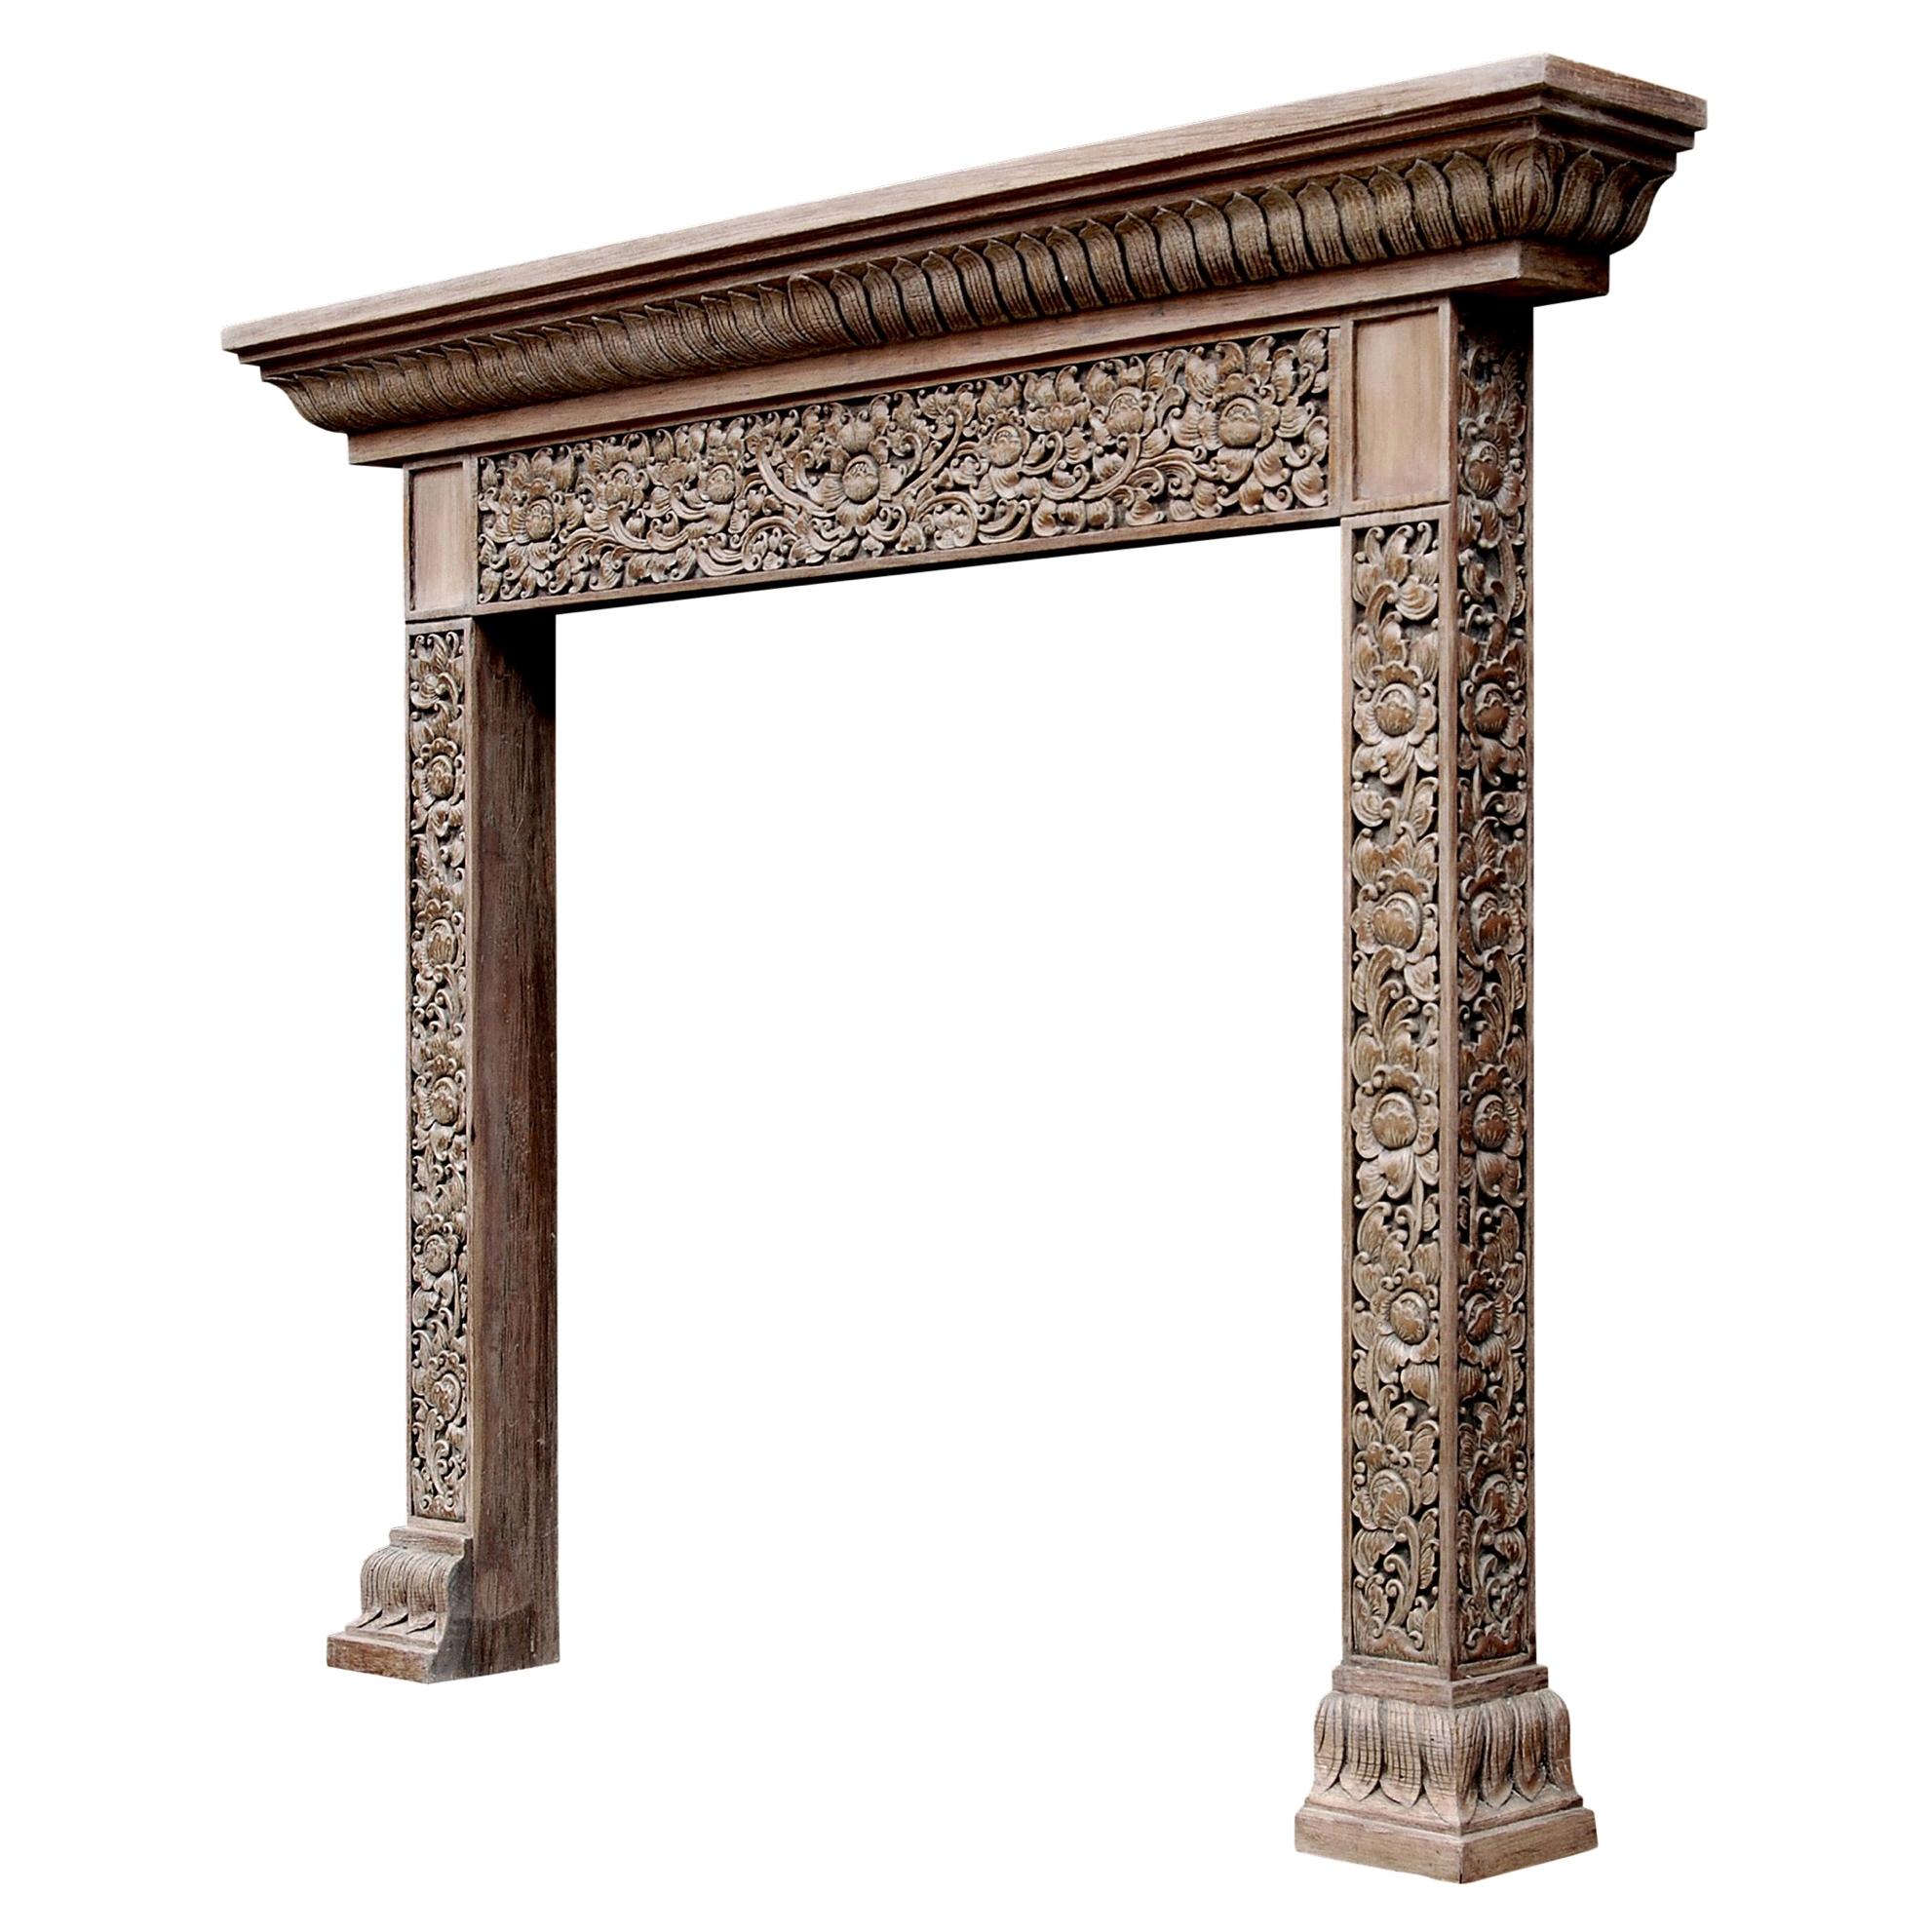 Heavily Carved Hardwood Fireplace with an Oriental Influence